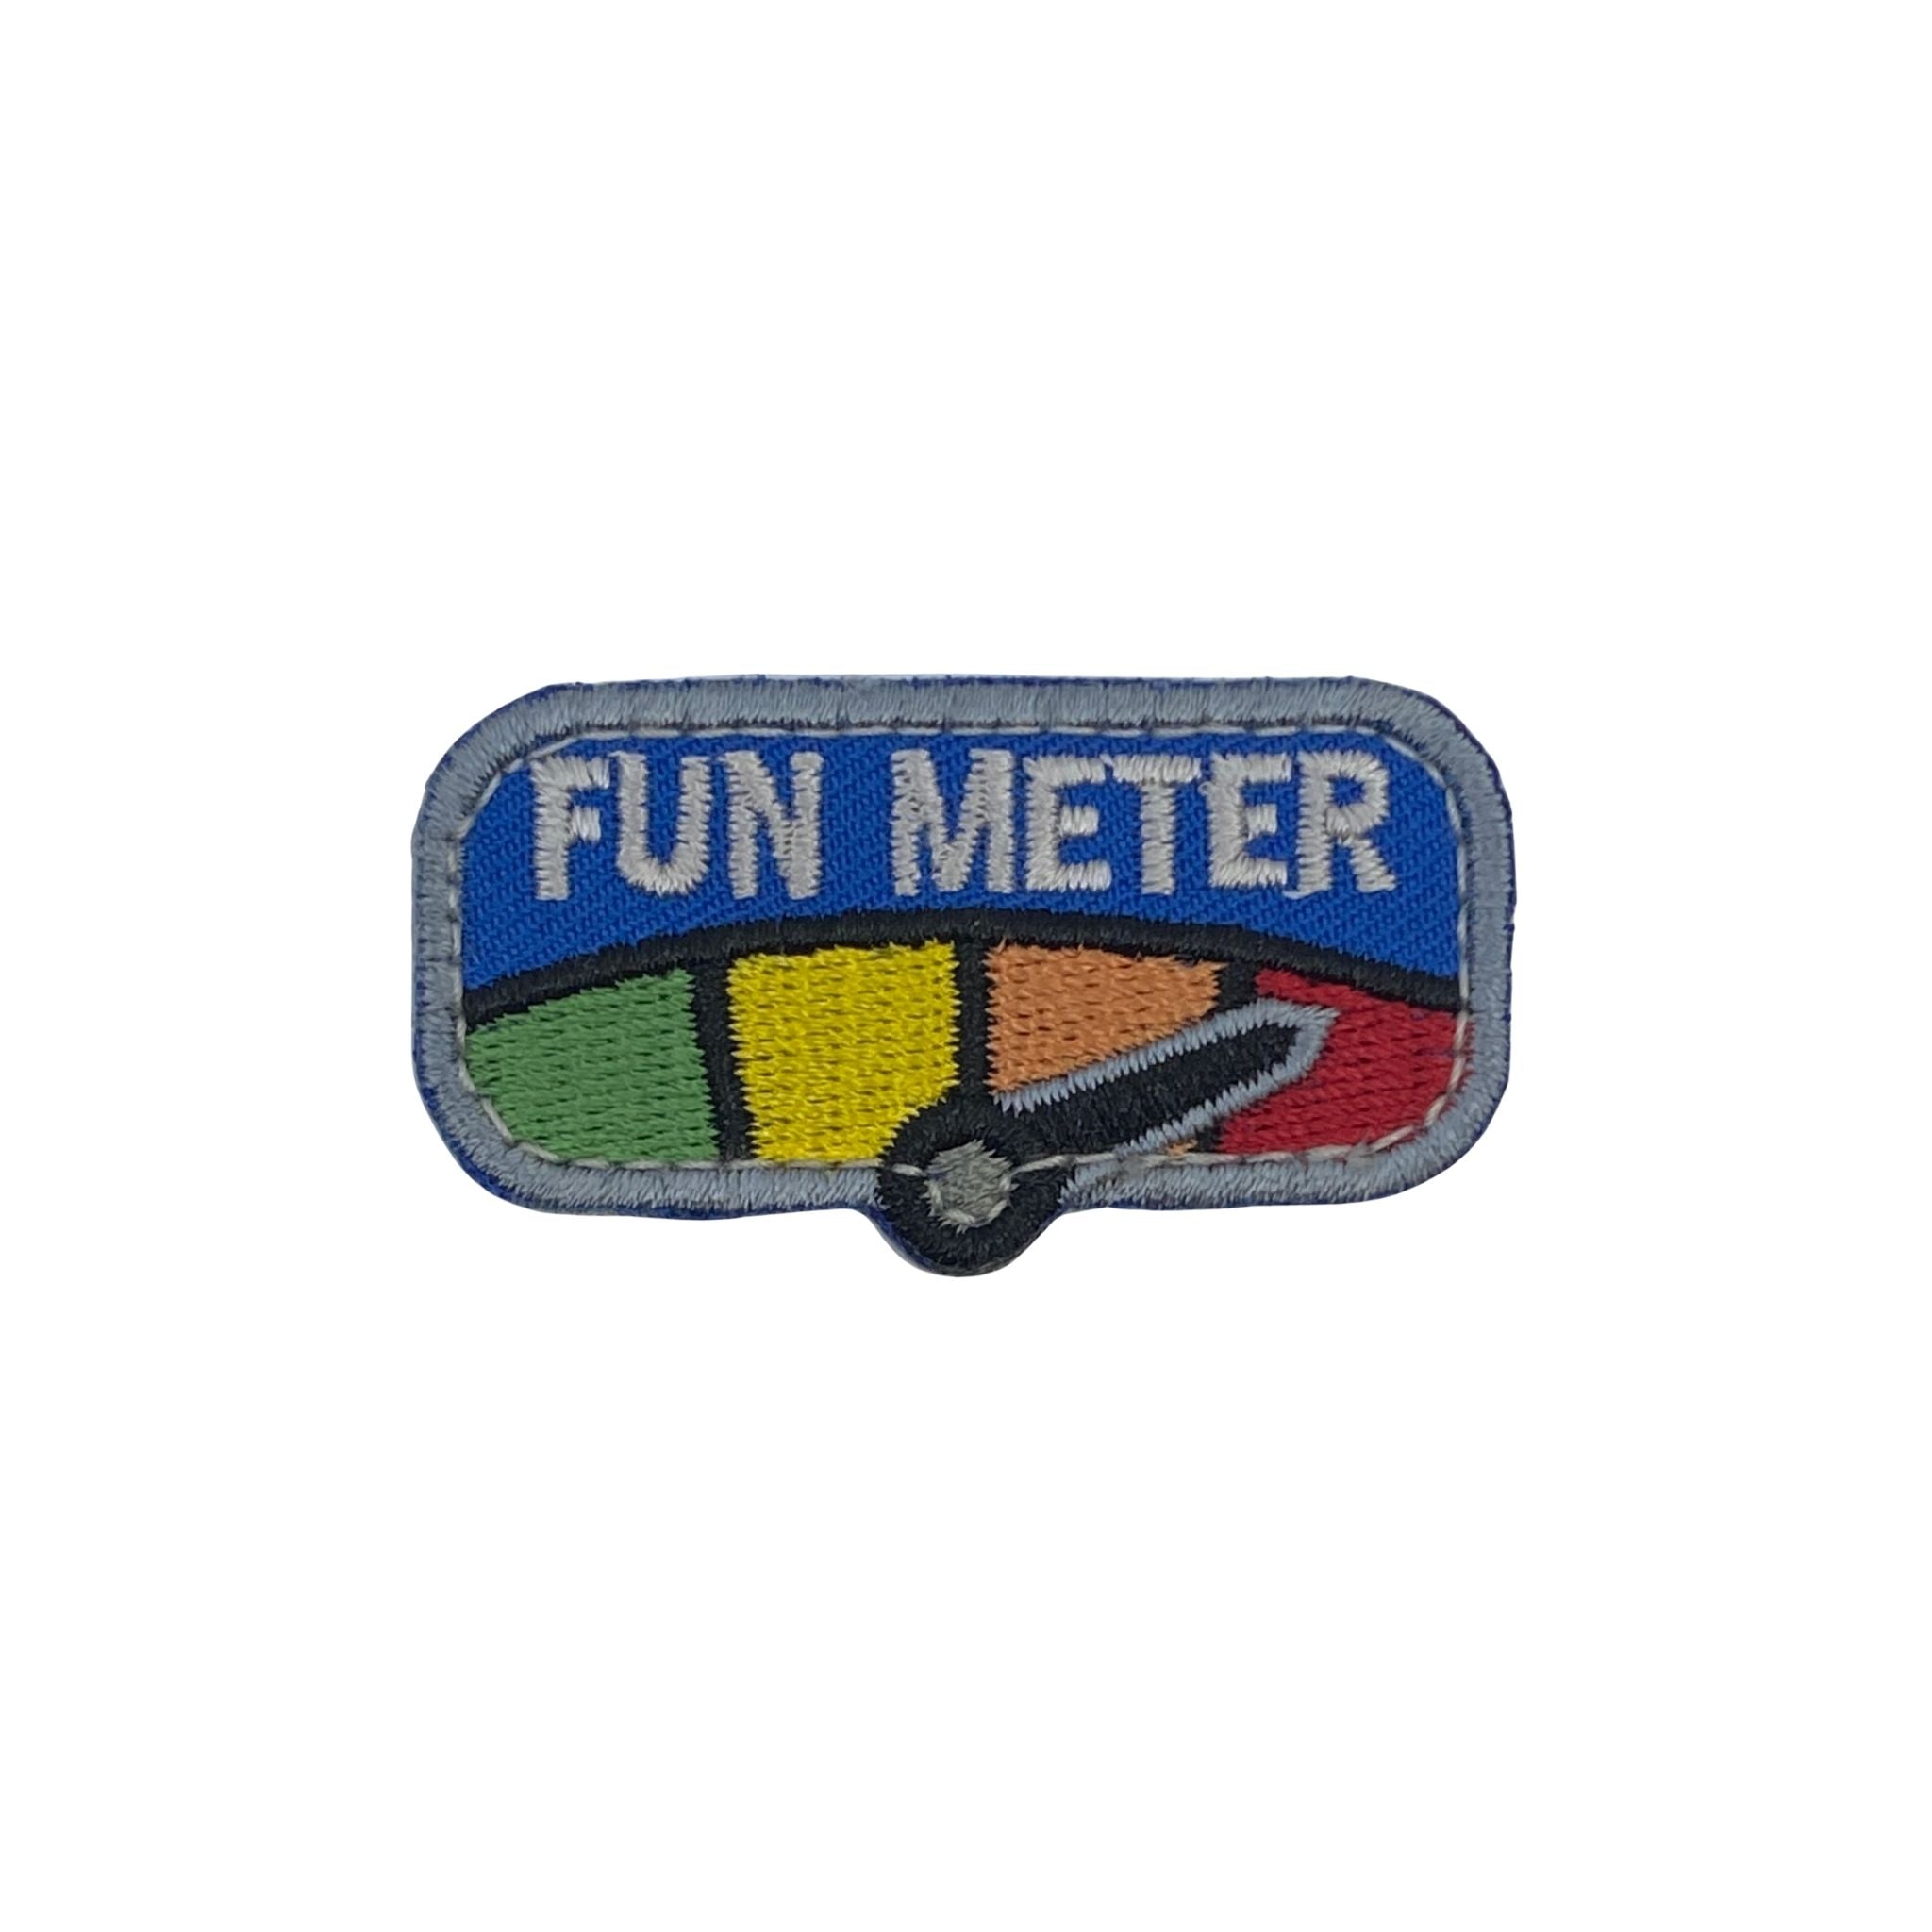 Funny Velcro Patch -  FUN METER  White Small Airsoft Tiger111HK Area